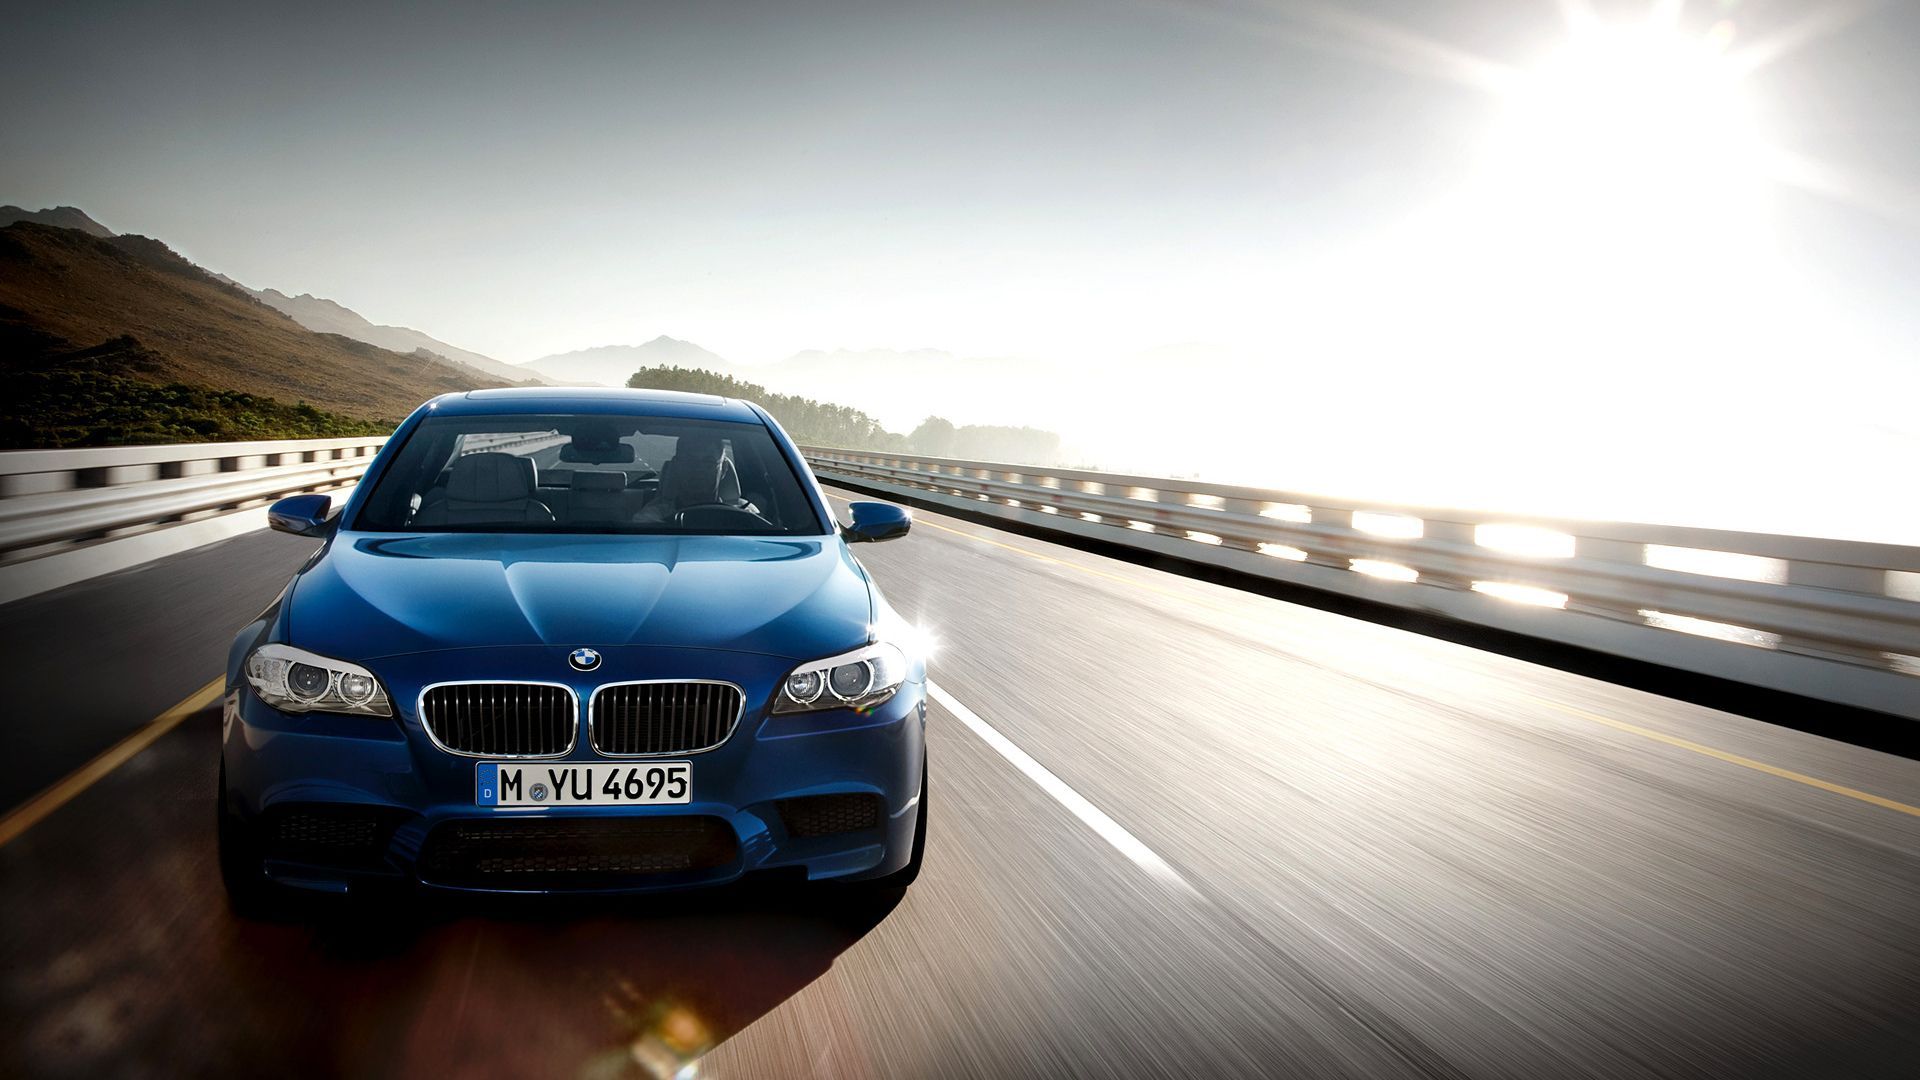 BMW M5 HD 1080p | Free High Definition Unique Hd Wallpapers ...